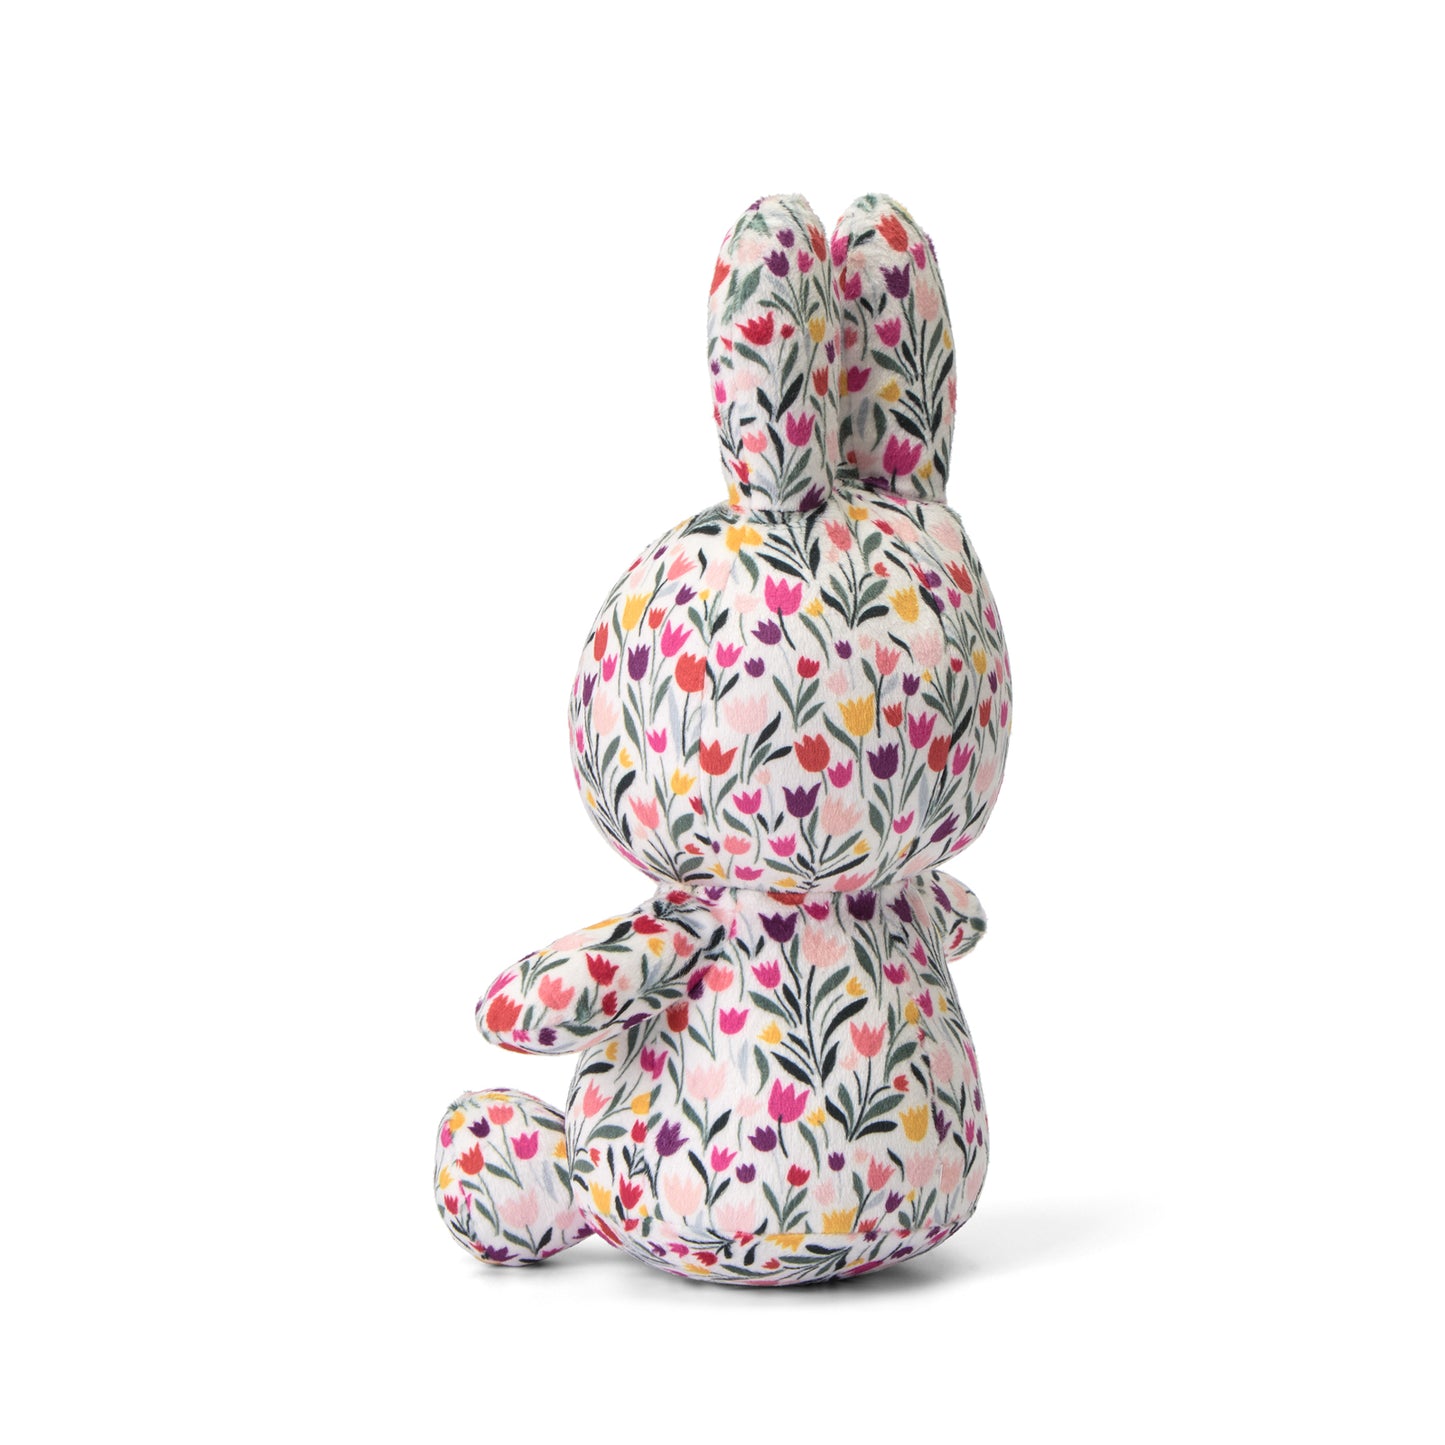 Miffy Sitting All-Over Tulip - 23cm - 9"